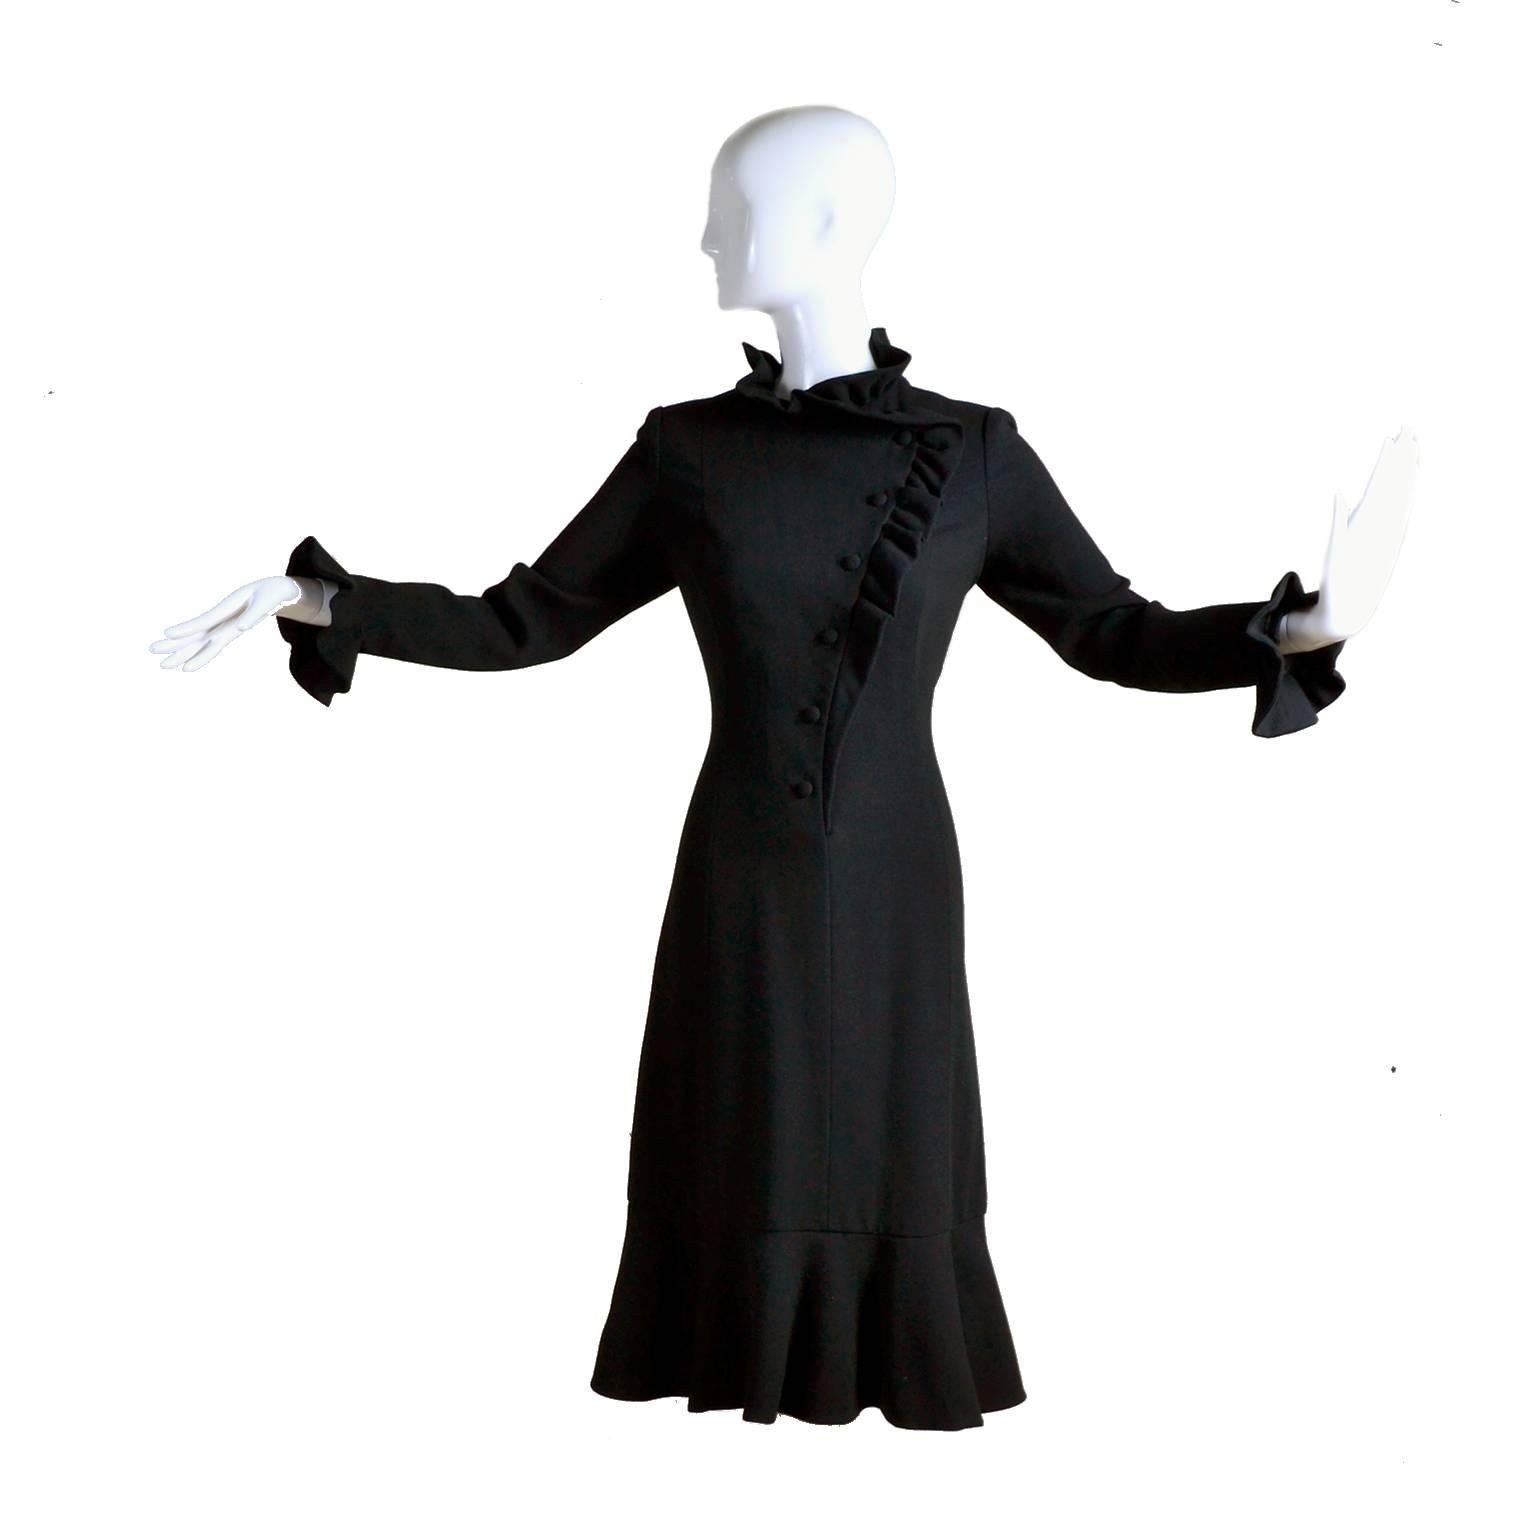 This 1970's vintage black crepe wool dress was designed by Jean Louis Berthault who was once a costume designer  at Columbia  and later, Universal Pictures.  The dress has a ruffled collar, ruffled hem, ruffles on the cuffs, and asymmetrical ruffle